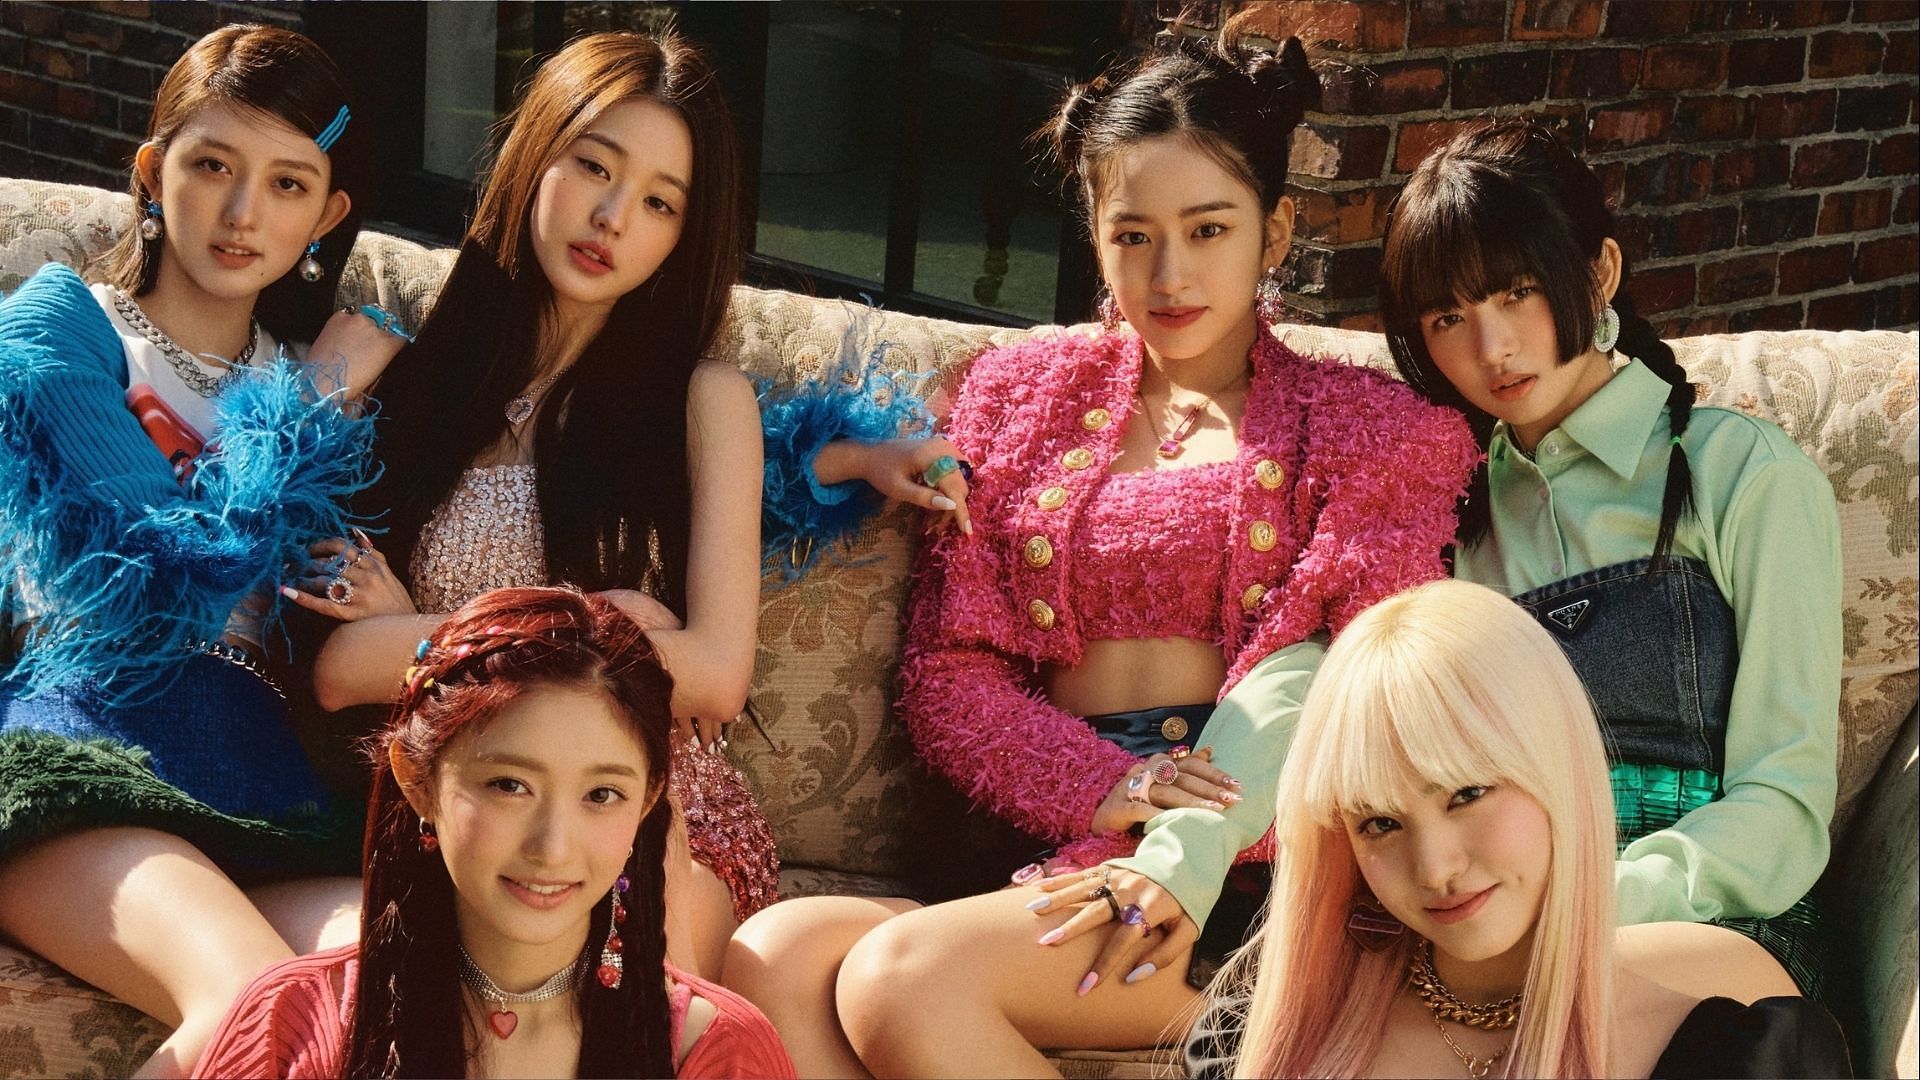 Rookie girl group IVE&#039;s concept photo (Image via @IVEstarship/Twitter)